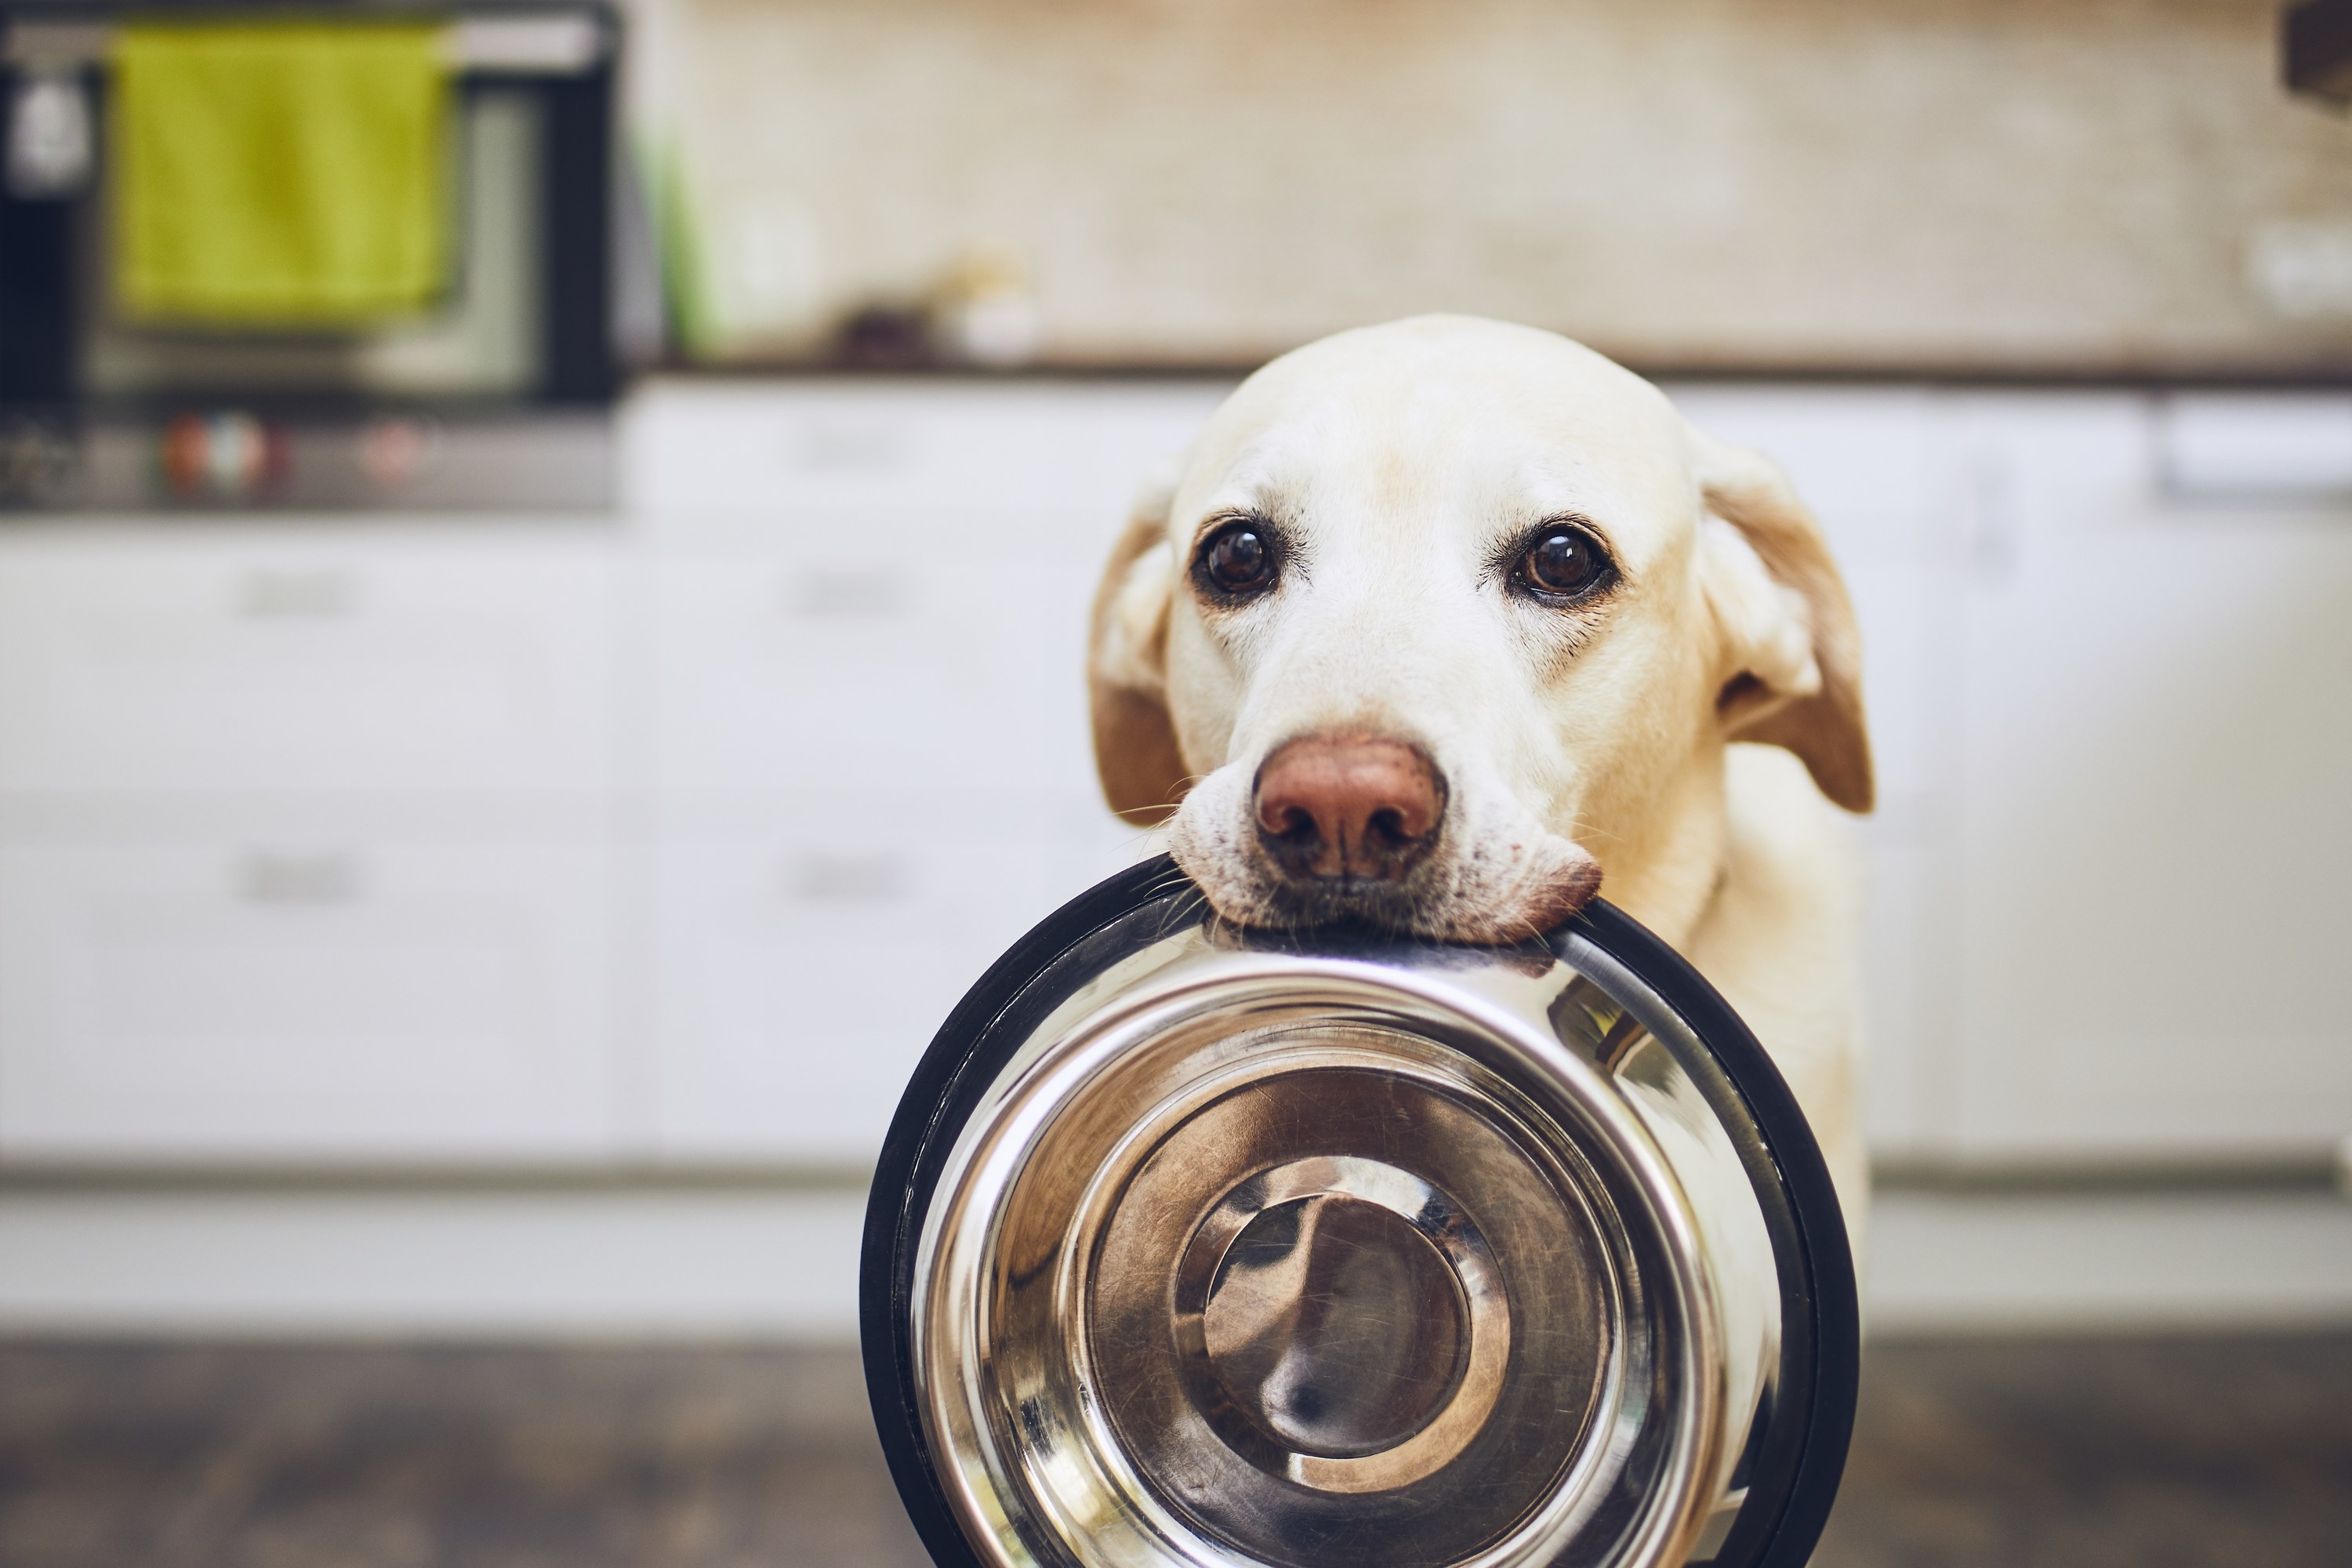 hungry dog holding a bowl in their mouth